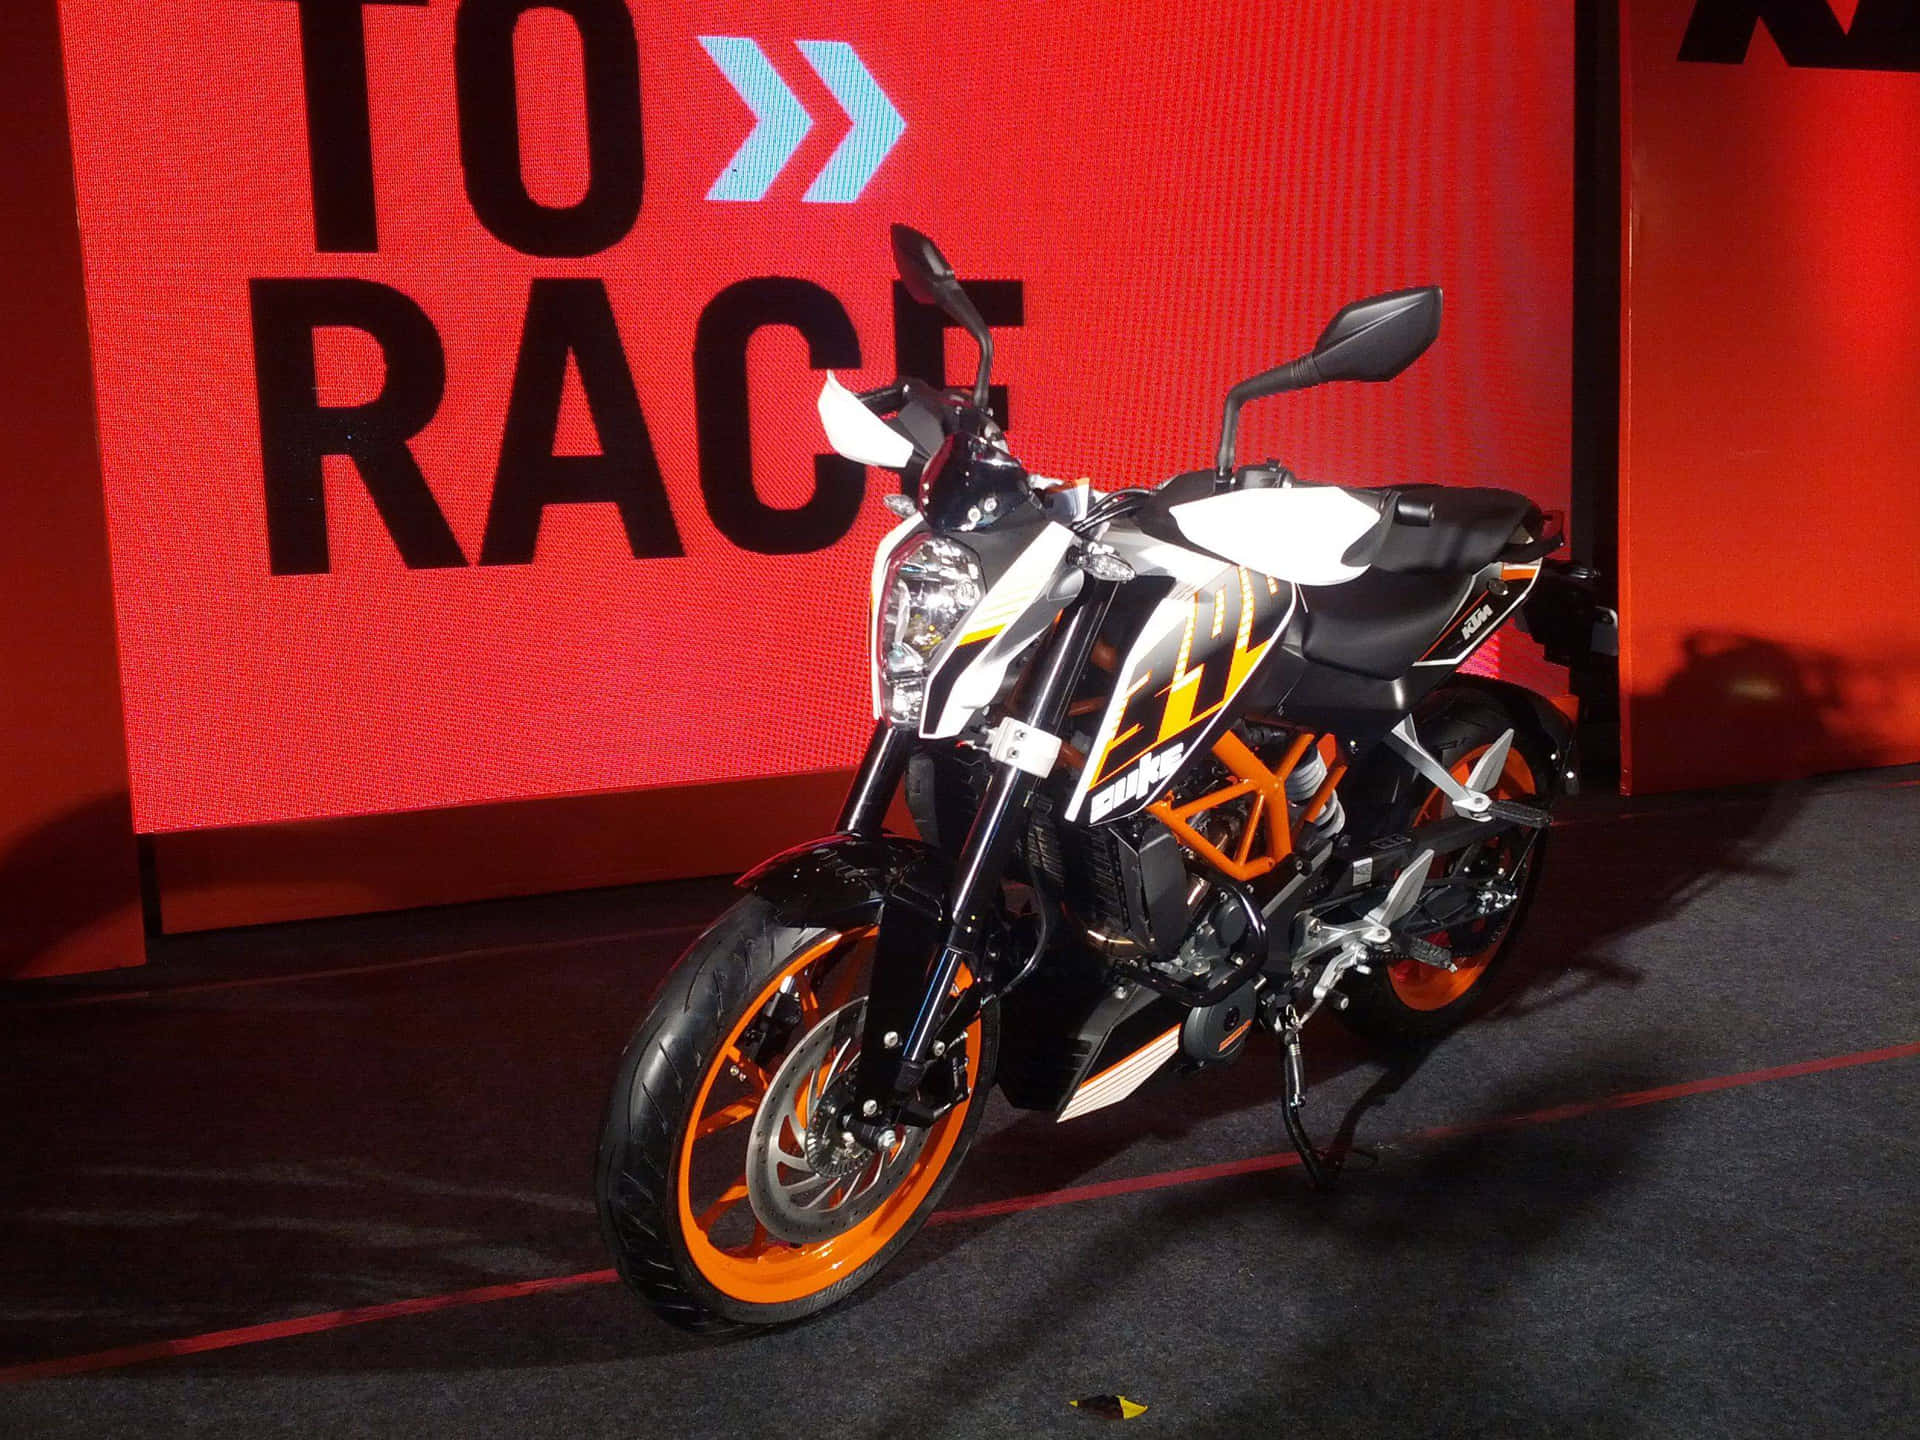 The All-New KTM Duke 390, Ready for the Ride!